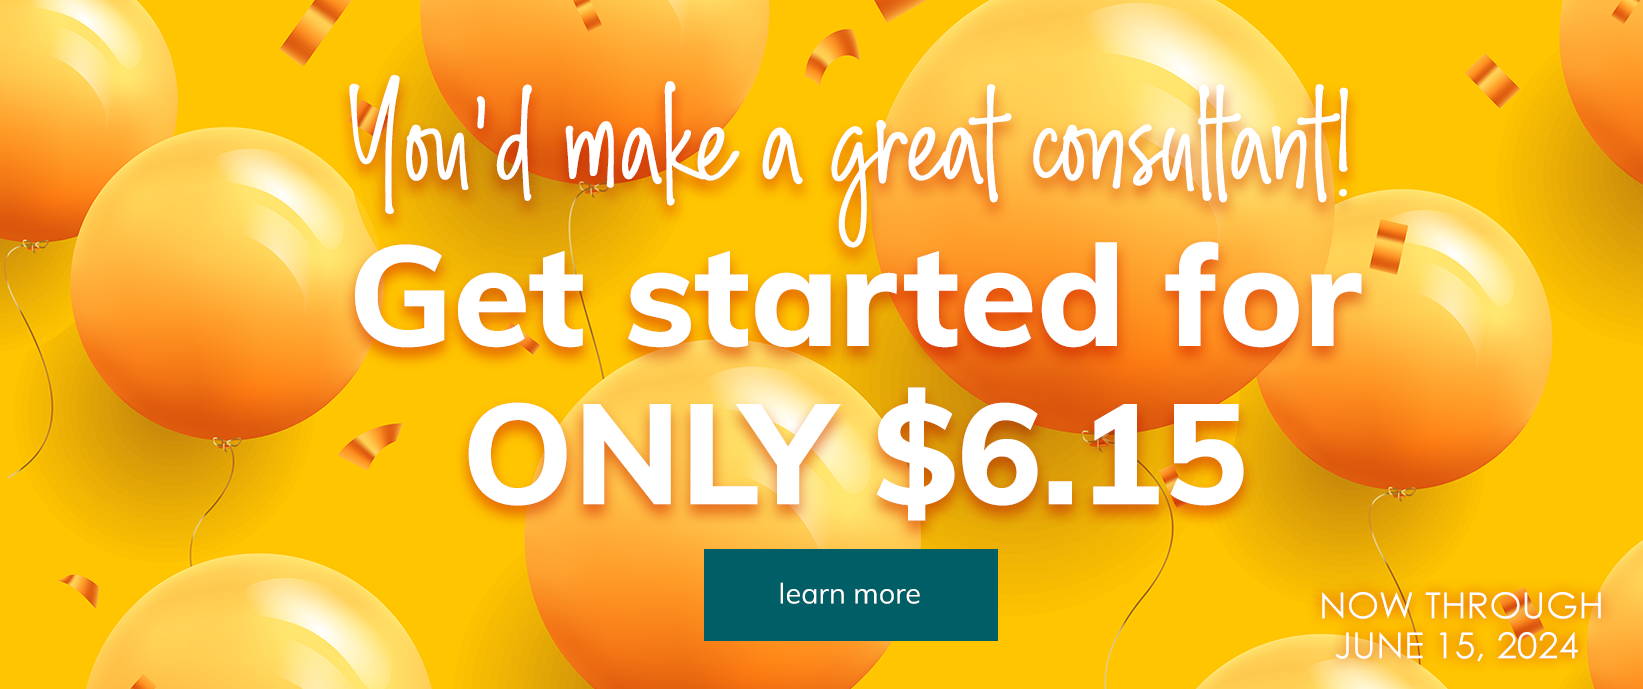 get started for only $6.15